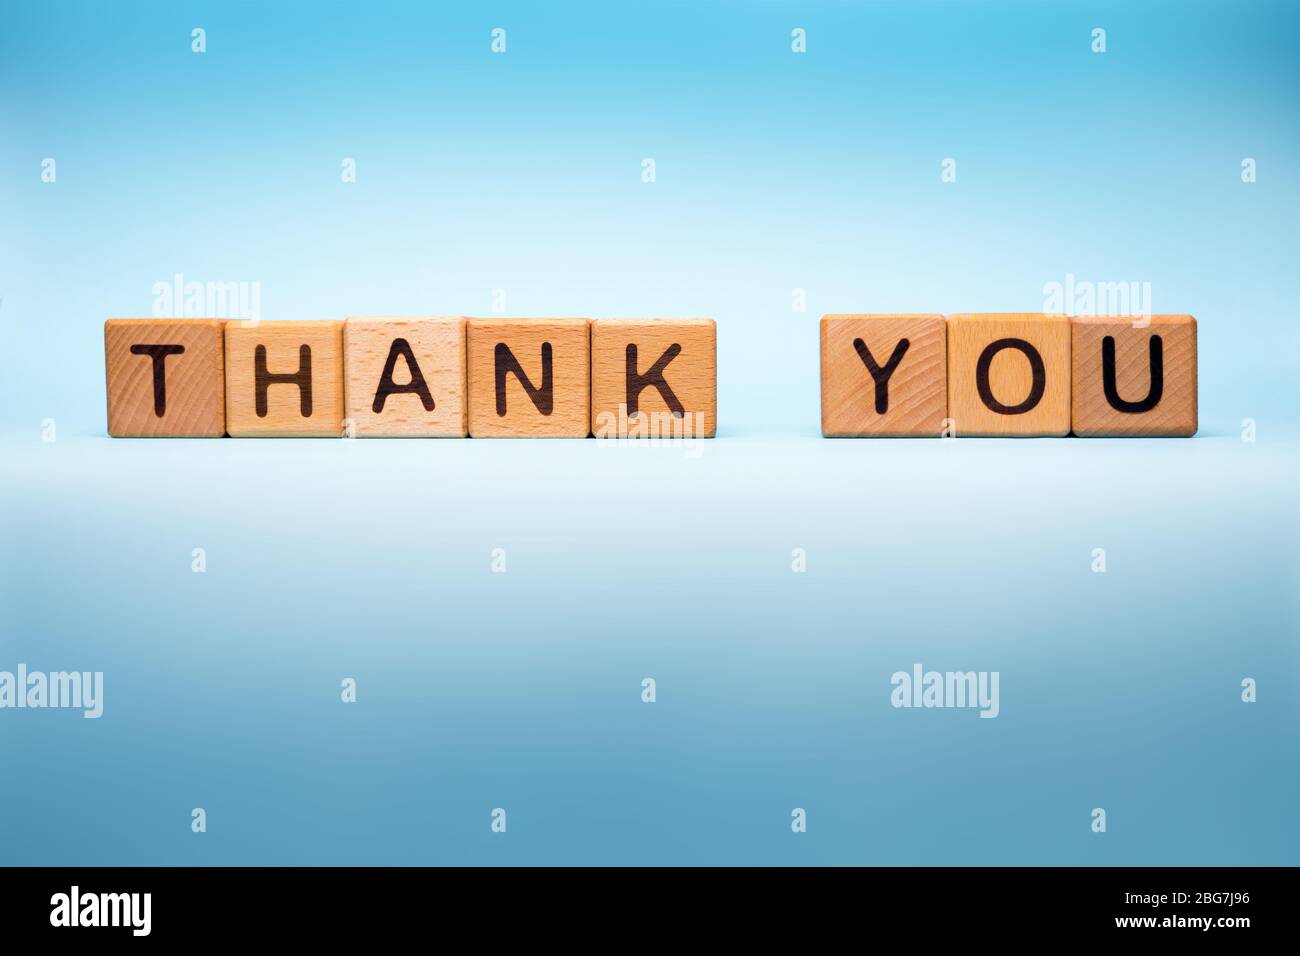 Thank you on blue medical background. Thank you made with cubes. Message of gratitude thanks to helpers. Symbol of hope during Covid-19 outbreak Stock Photo